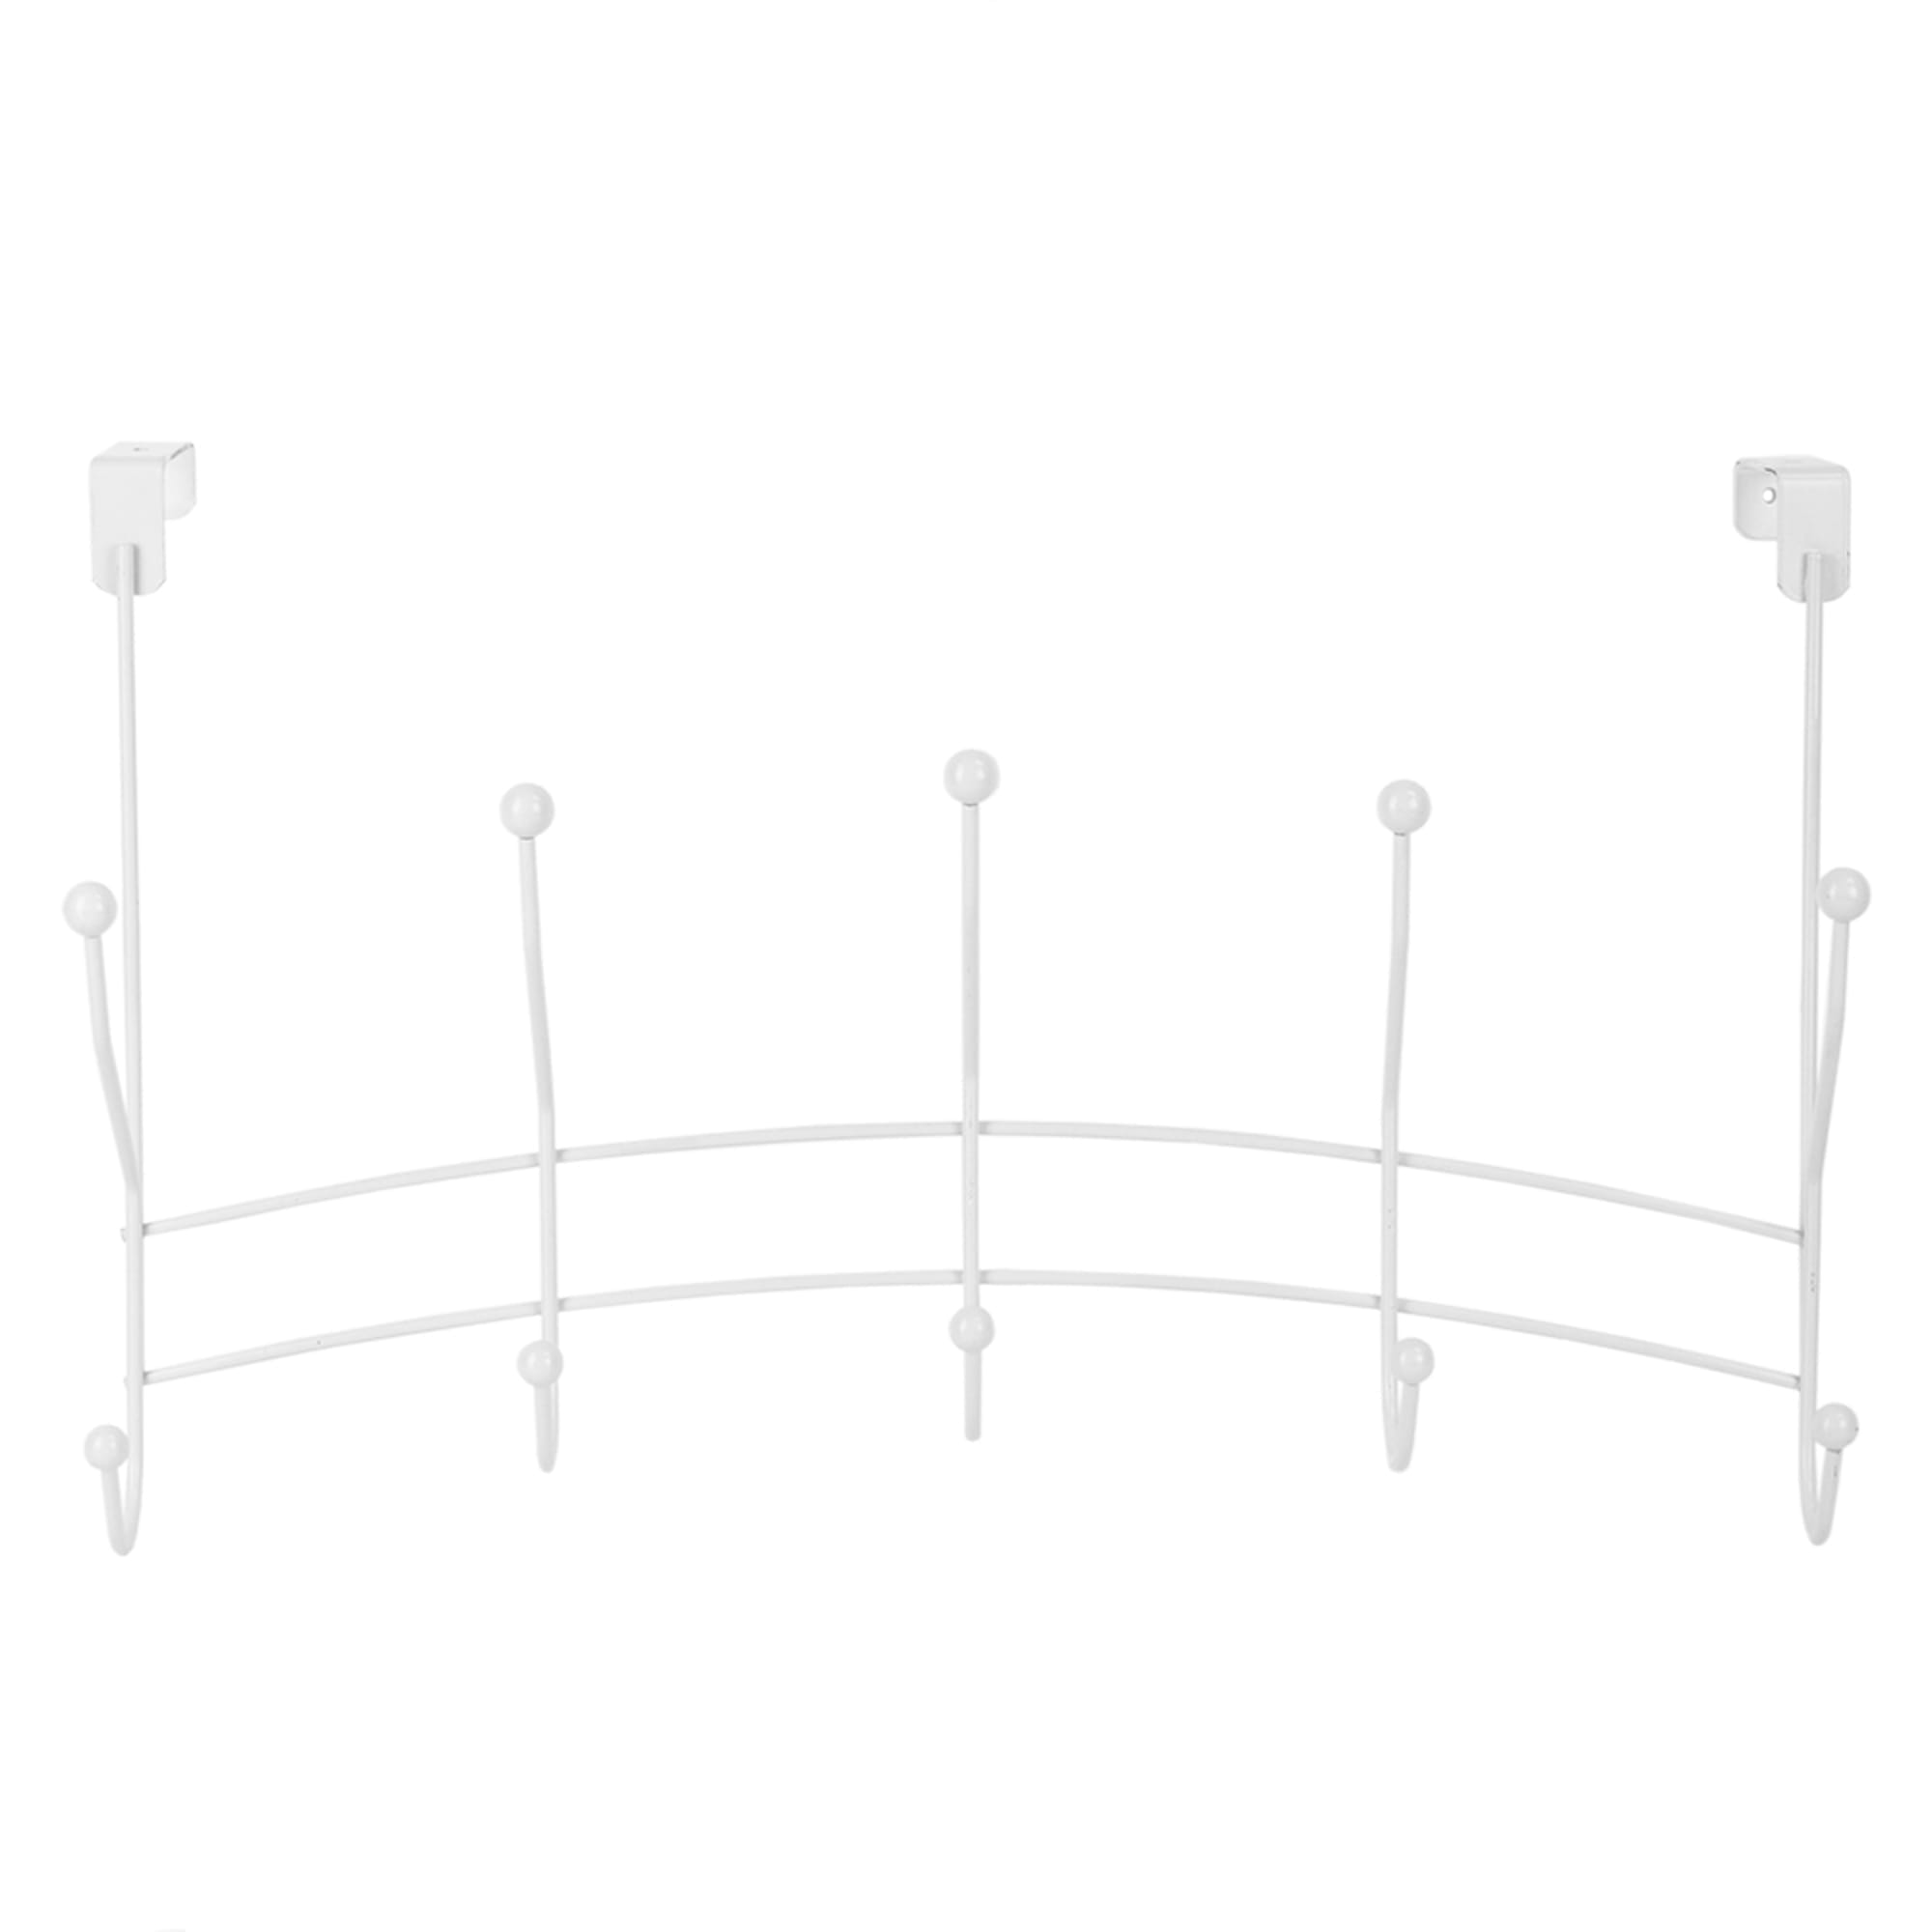 Home Basics Shelby 5 Hook Over the Door Hanging Rack, White $5.00 EACH, CASE PACK OF 12